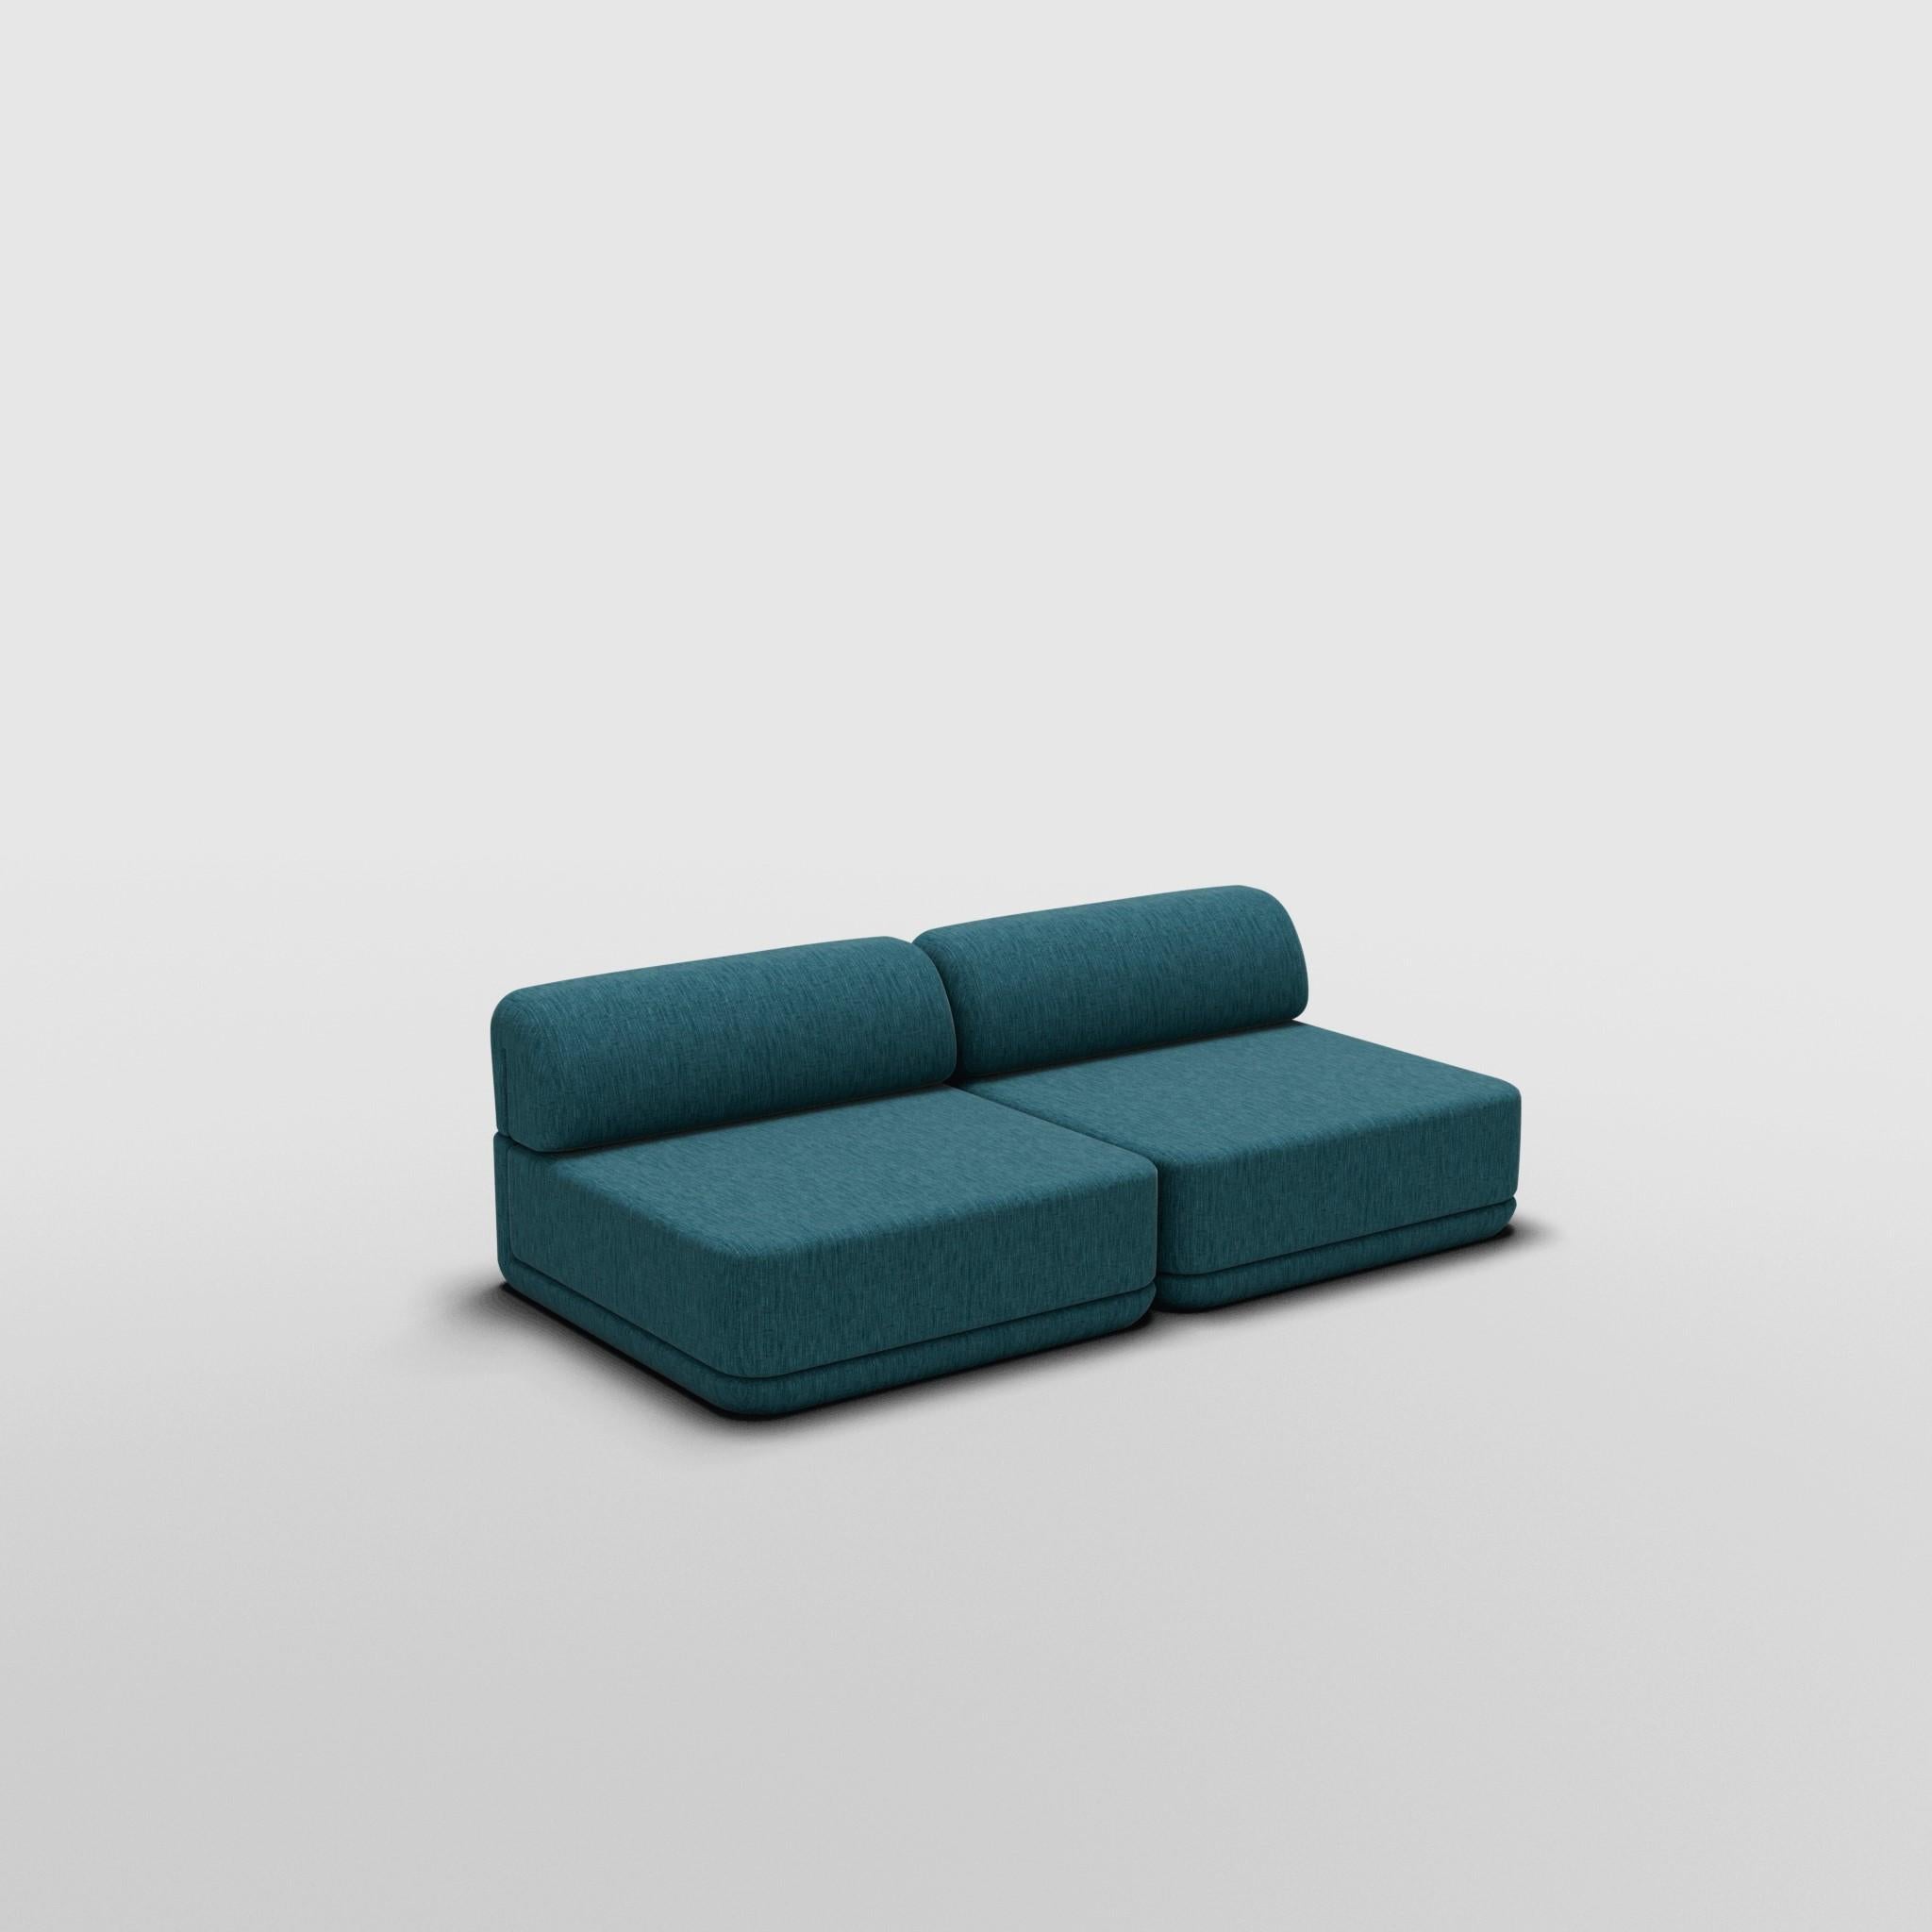 Lounge Set - Inspired by 70s Italian Luxury Furniture

Discover The Cube Sofa, where art meets adaptability. Its sculptural design and customizable comfort create endless possibilities for your living space. Make a statement, elevate your home.

The